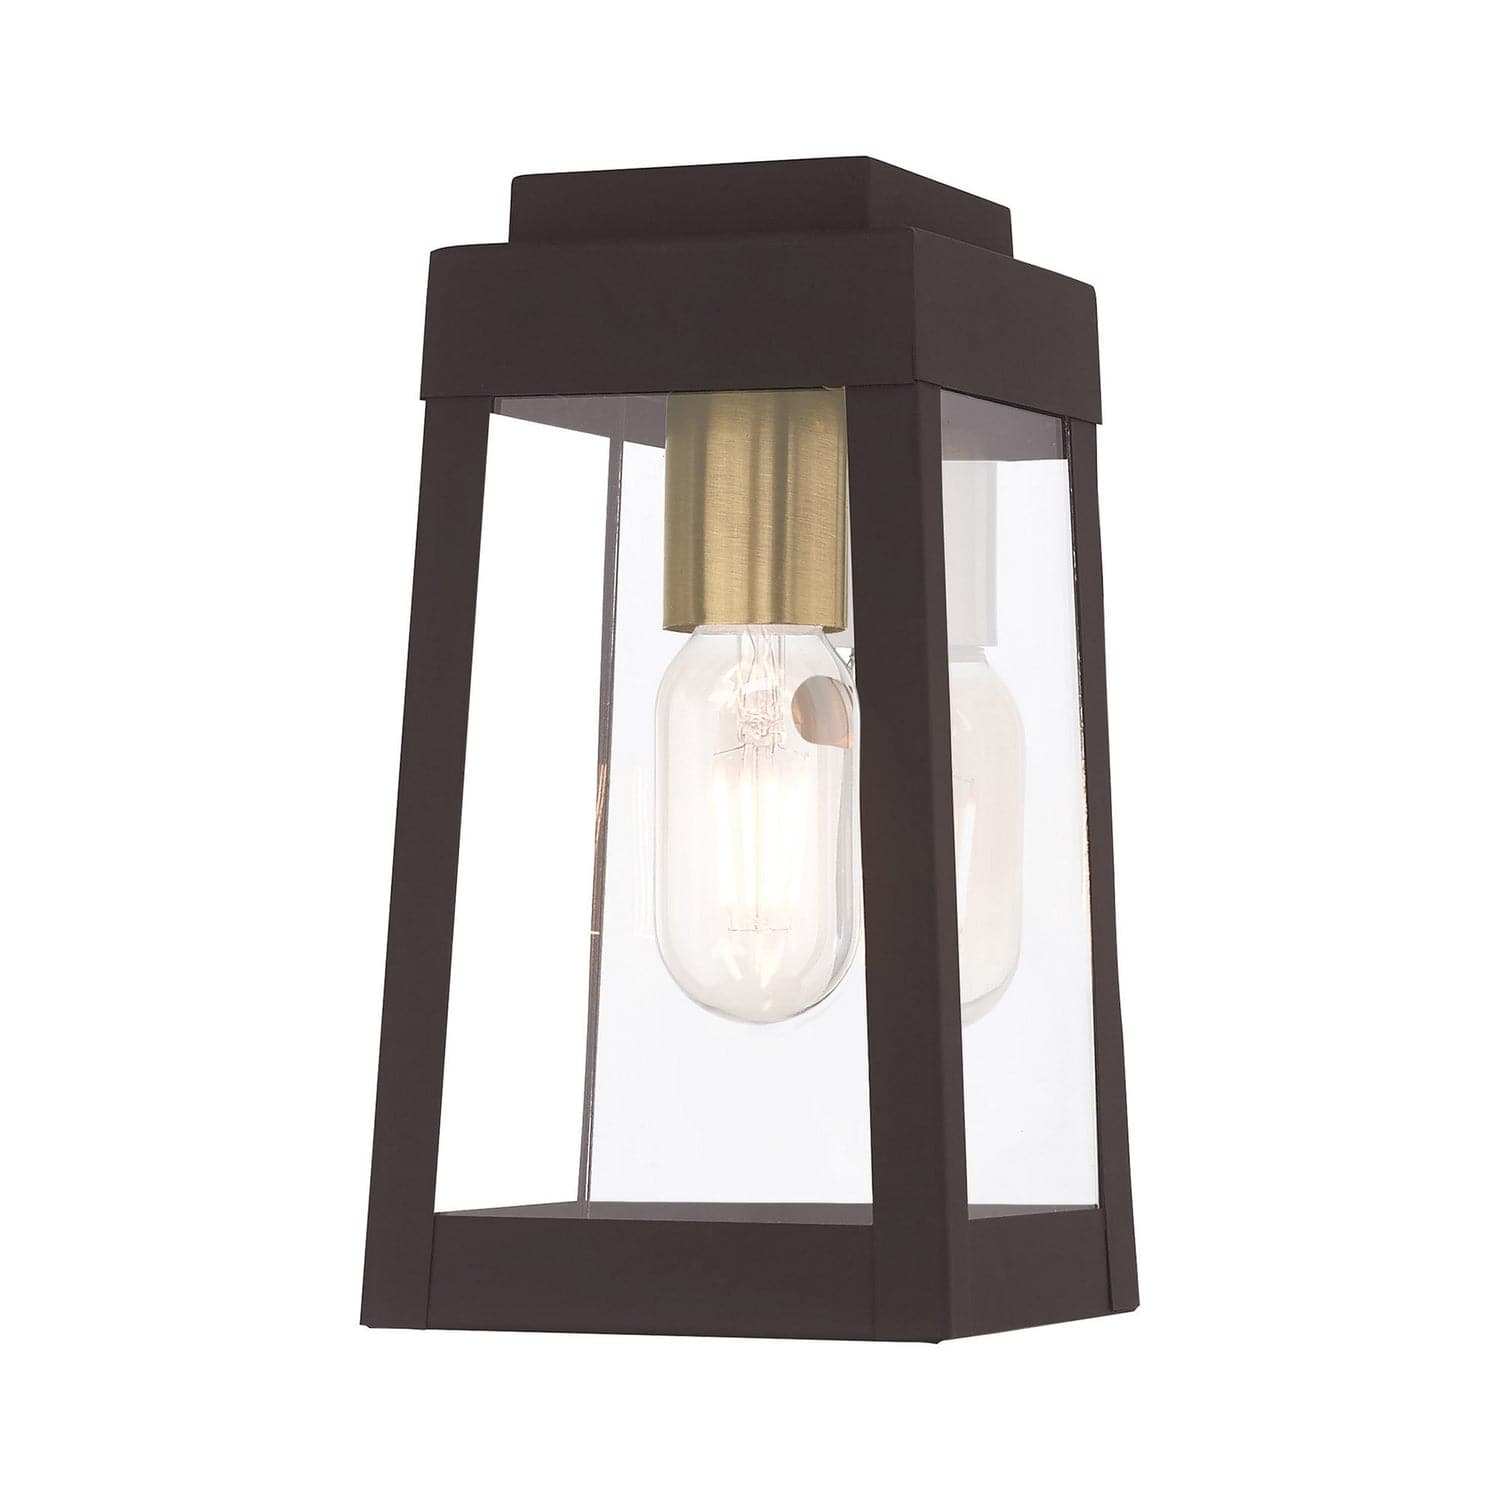 Livex Lighting - 20851-07 - One Light Outdoor Wall Lantern - Oslo - Bronze w/ Antique Brass and Polished Chrome Stainless Steel